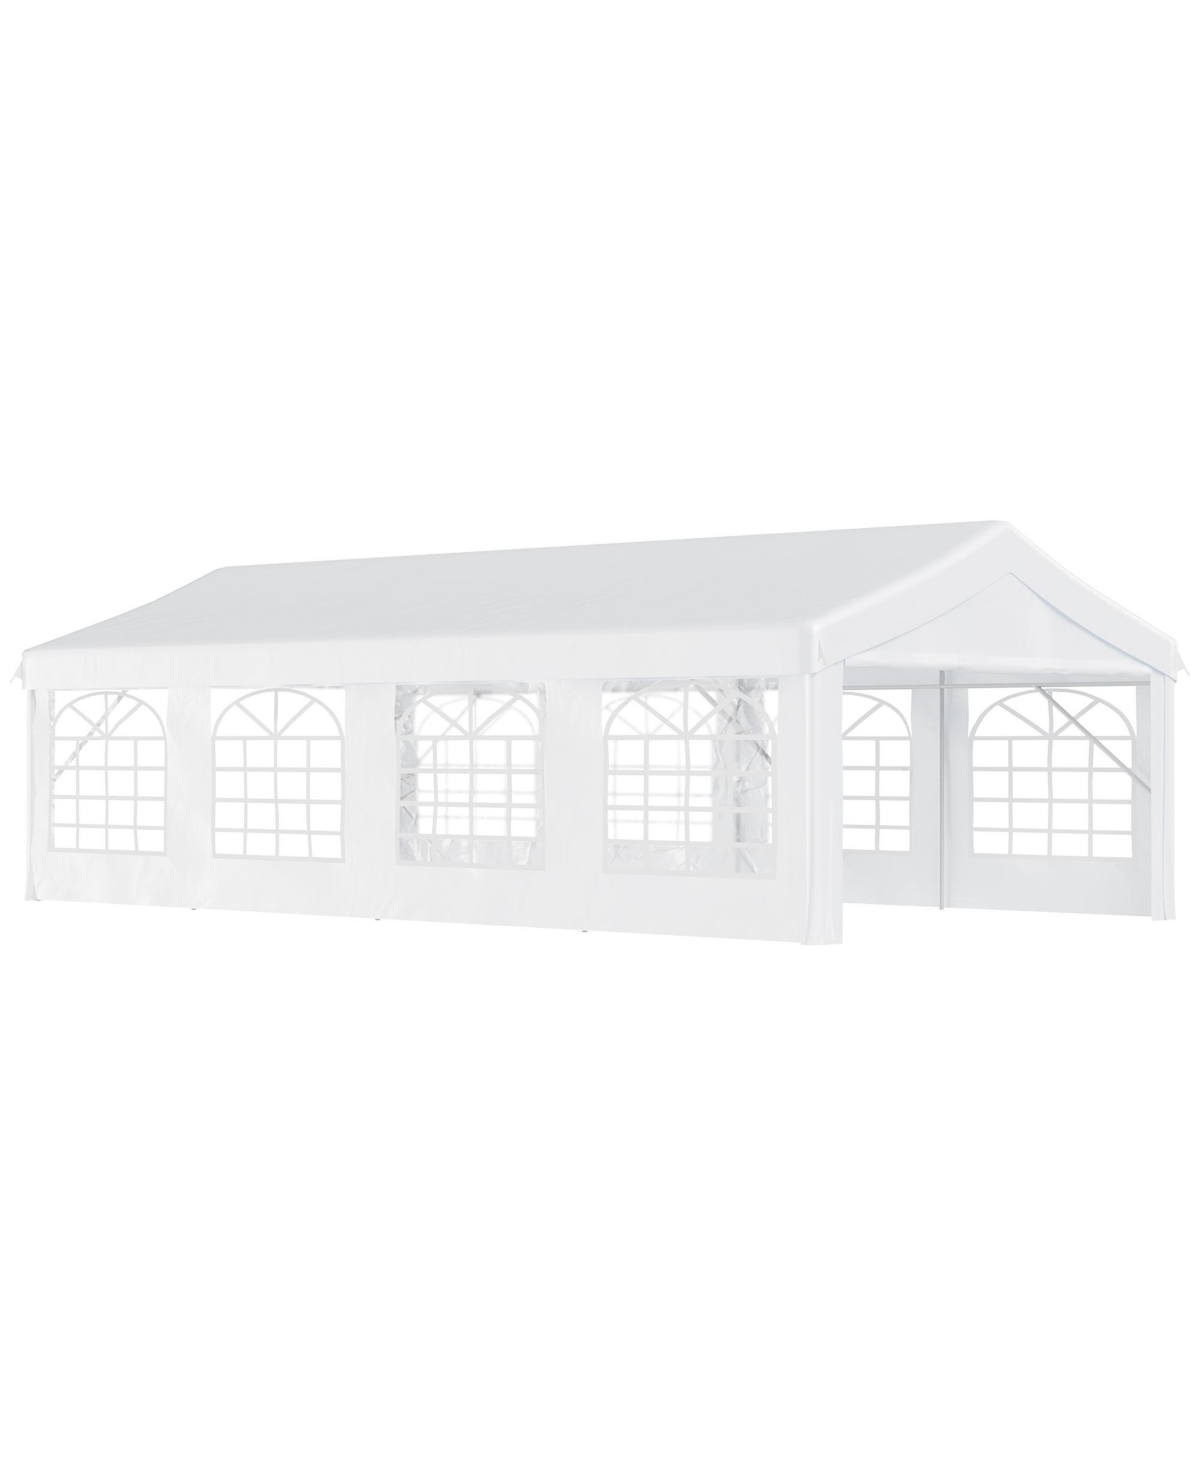 13' x 26' Party Tent & Carport with Removable Sidewalls and Zipper Doors, Heavy Duty Canopy Tent Sun Shade Shelter, for Parties, Wedding, Eve